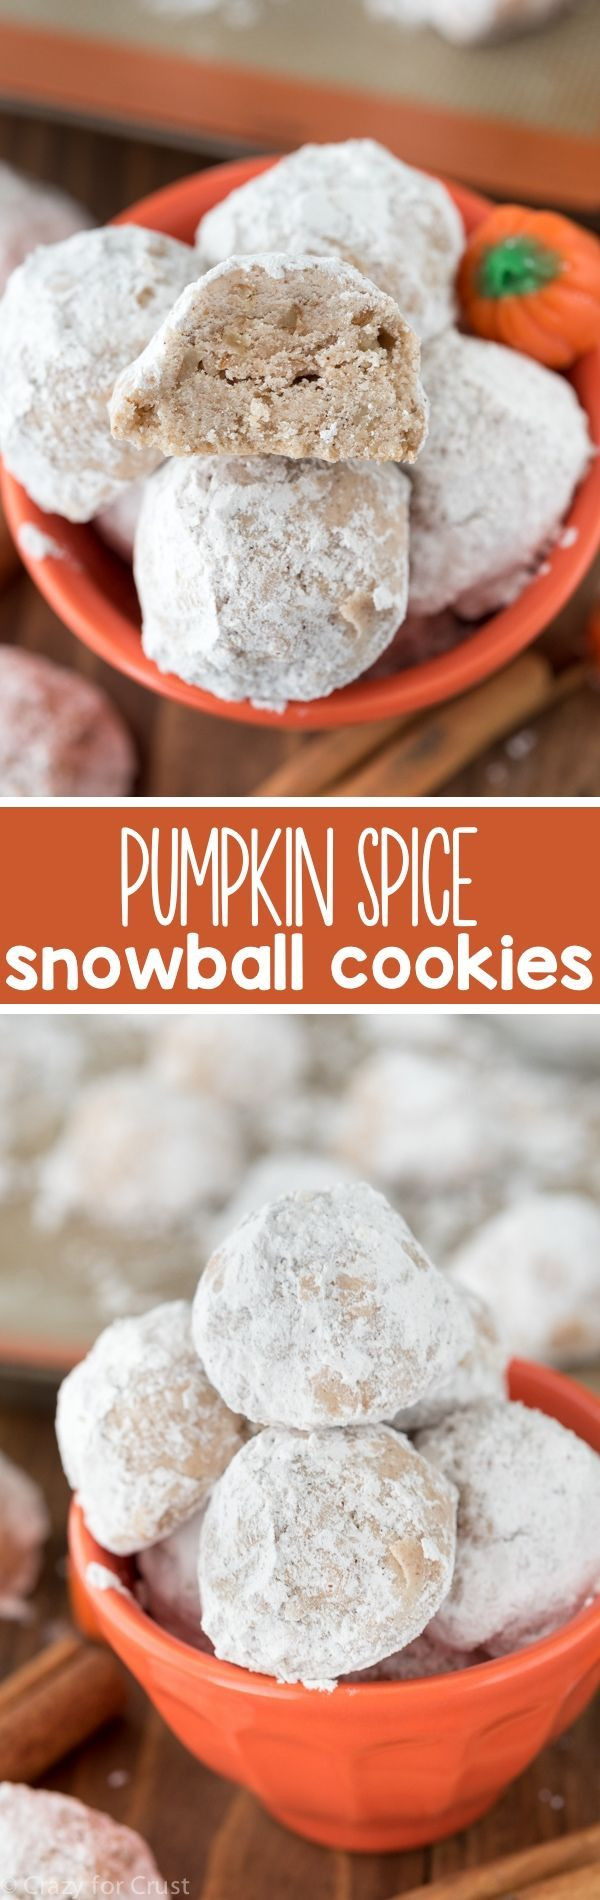 Fall Cookies Recipe
 These Easy Pumpkin Spice Snowball Cookies are a family